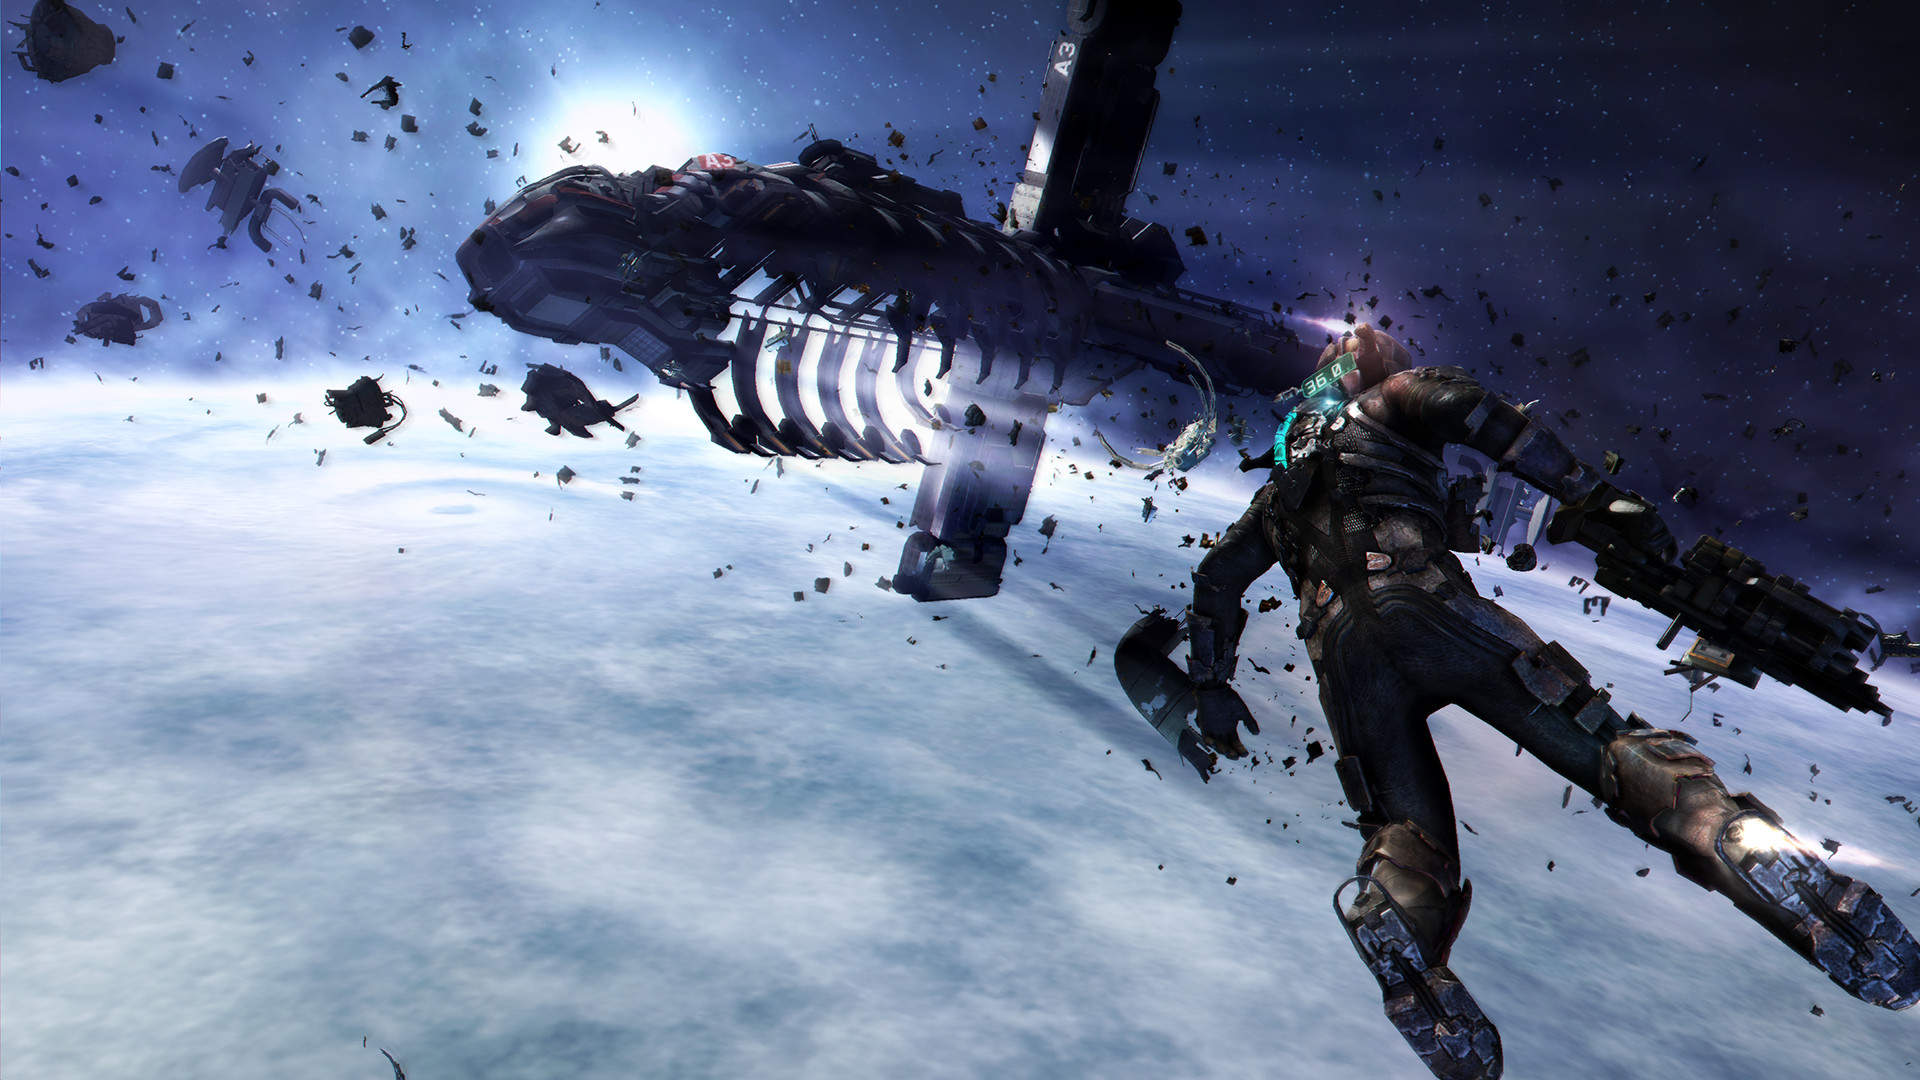 Dead Space™ 3 Free Download